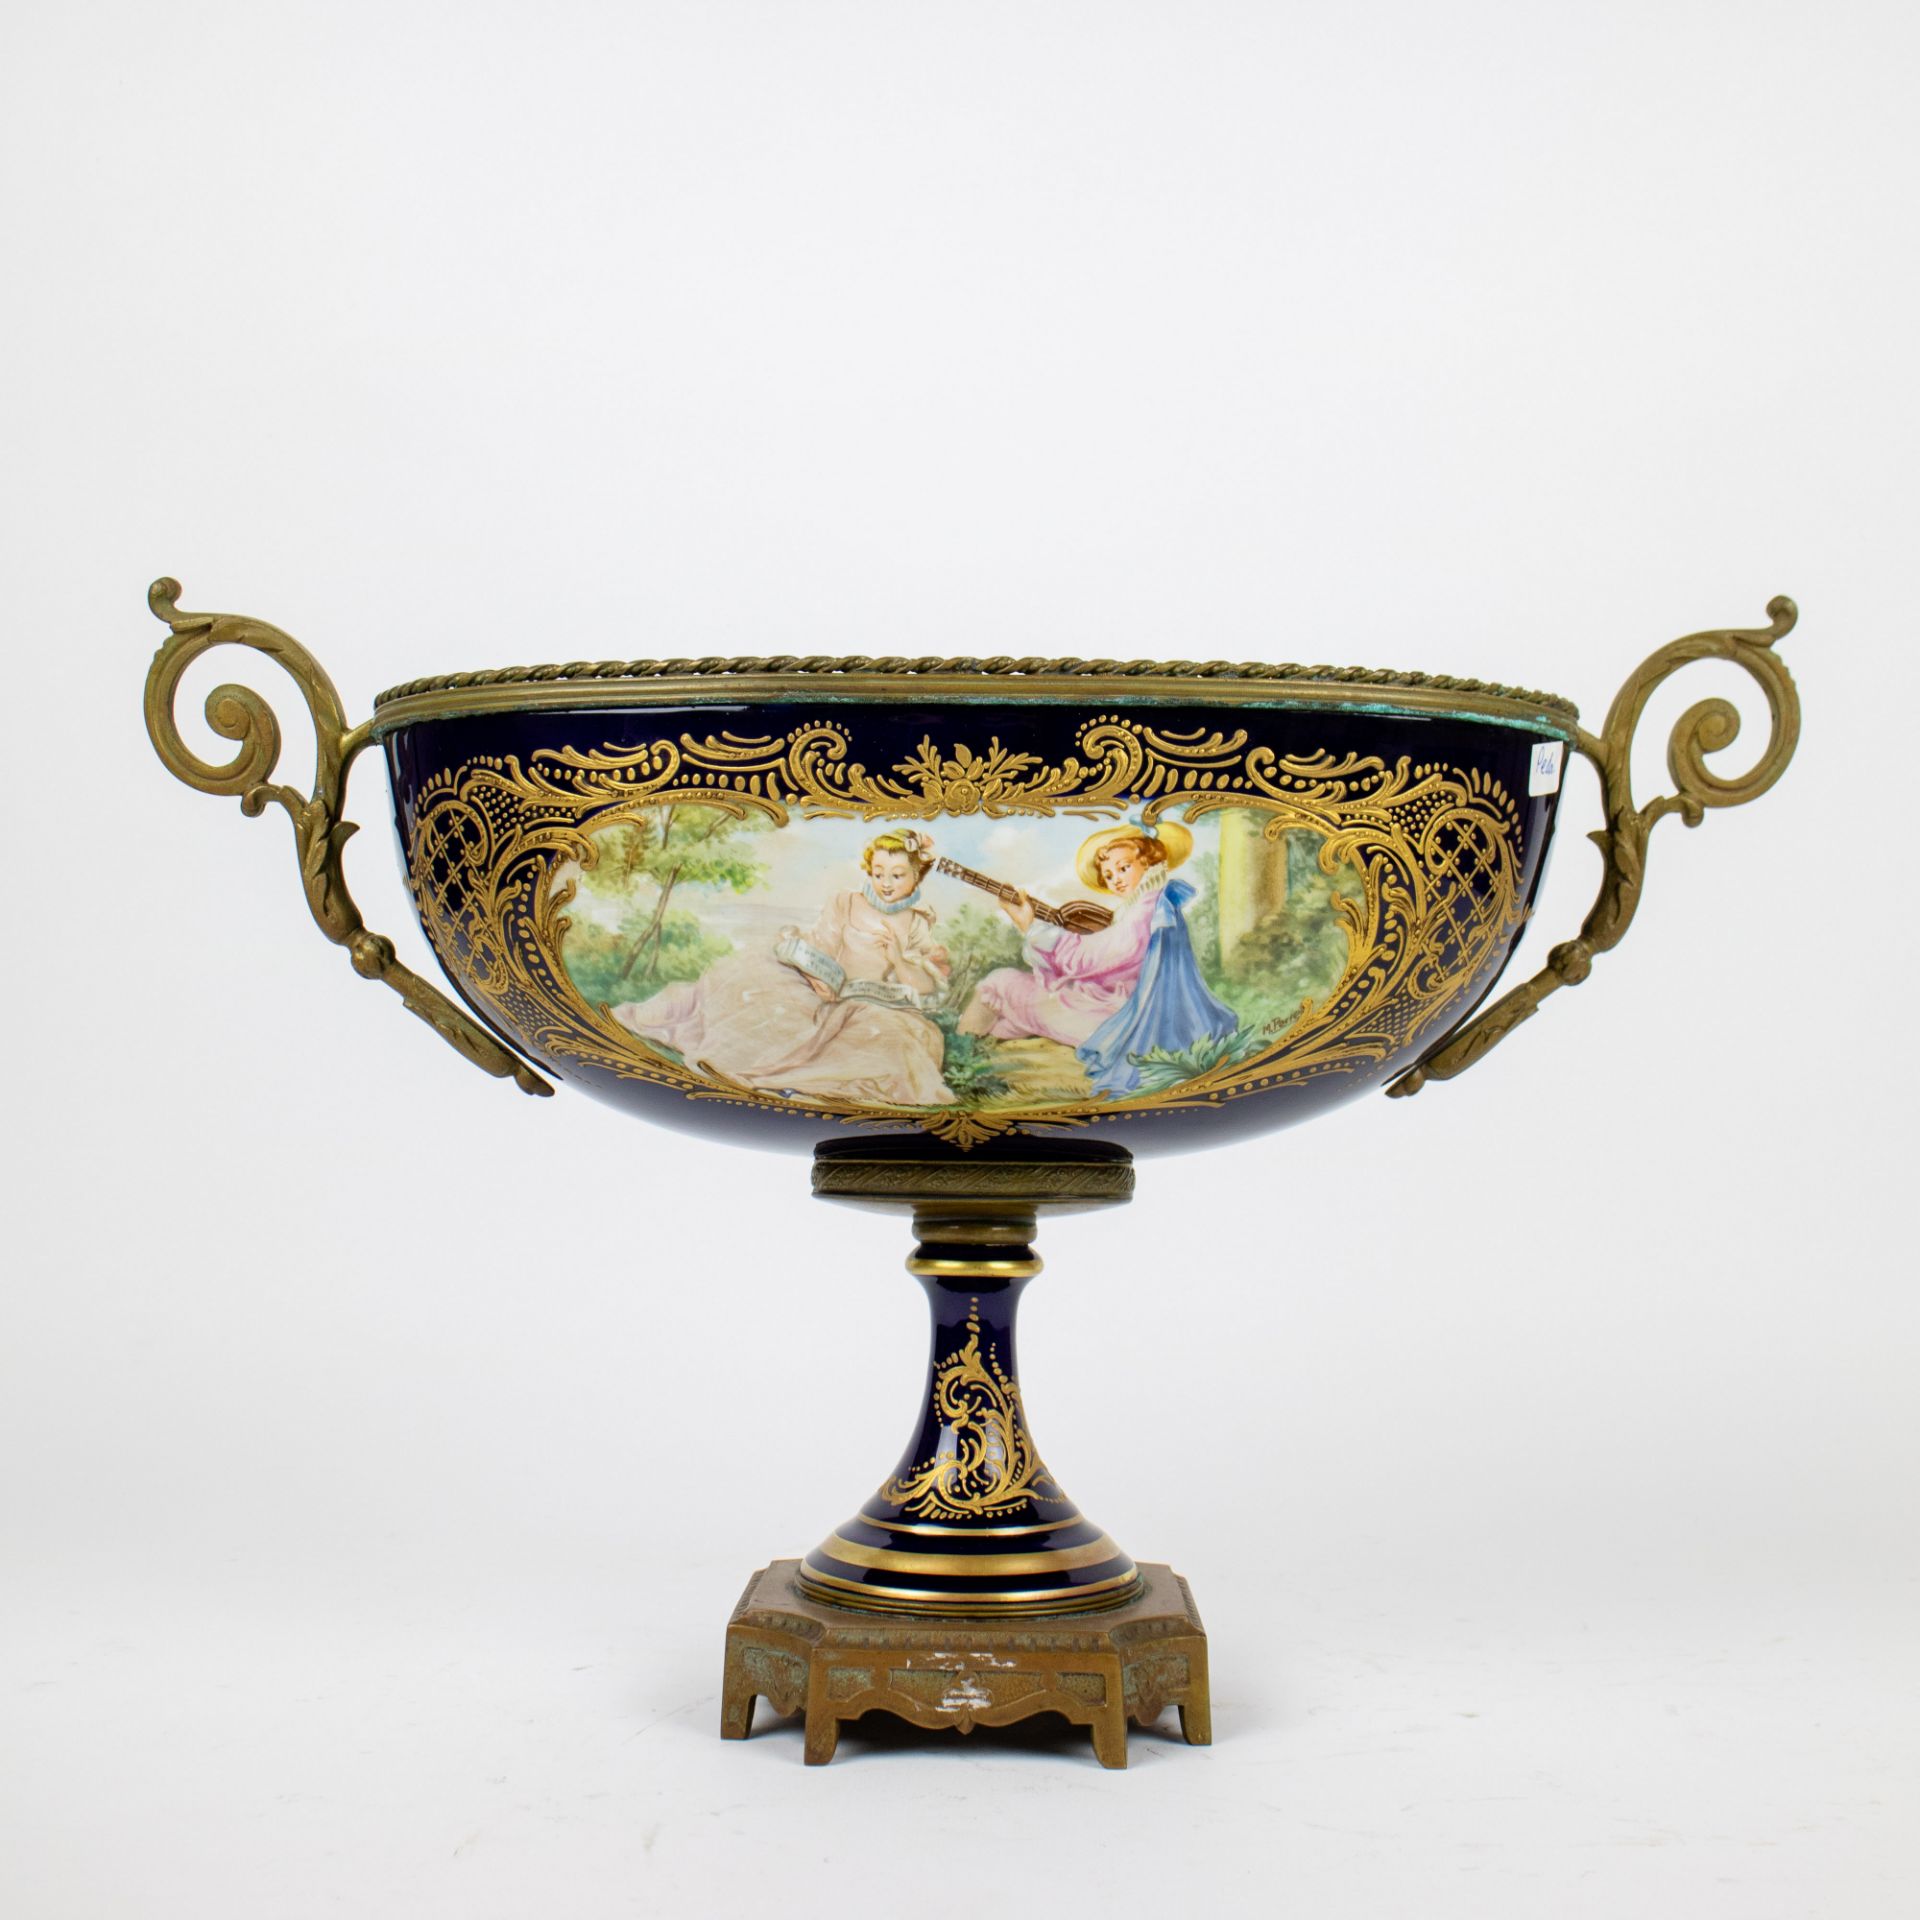 Sèvres handpainted garniture centre piece and a pair of covered vases - Image 2 of 16